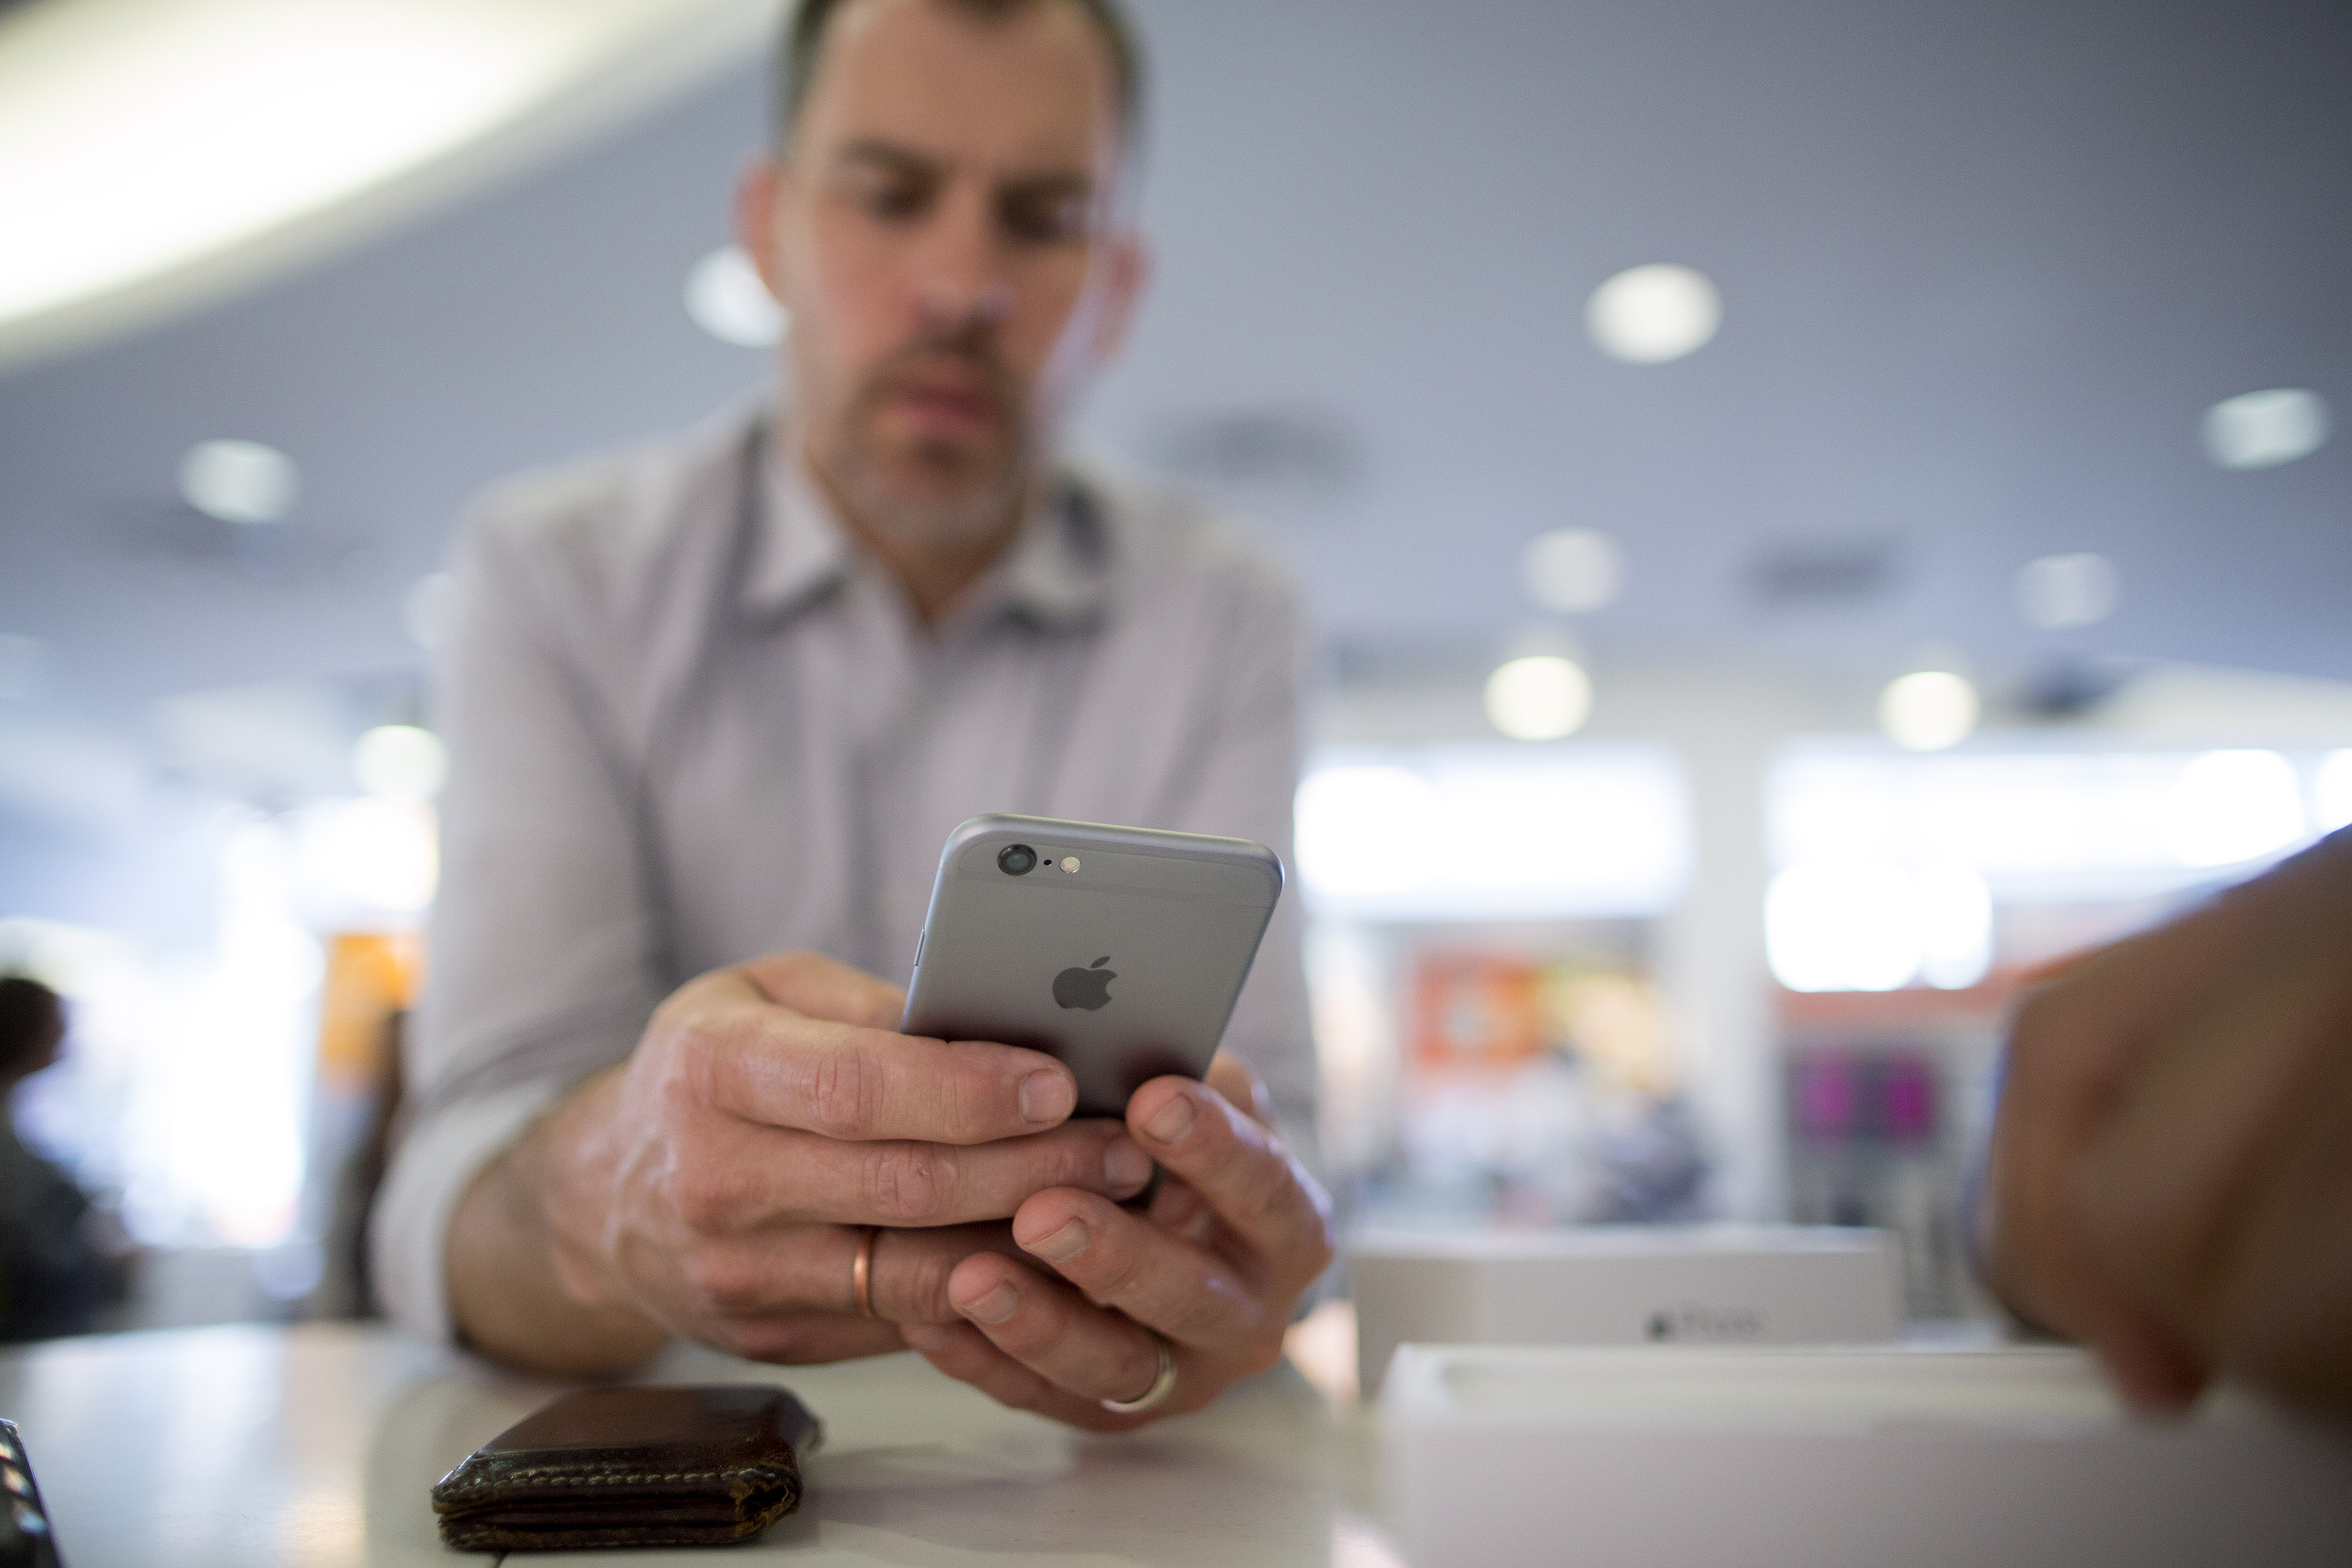 Retail sales consultant Ahmal Warner, right, helps customer Joel Nelson set up his new Apple Inc. iPhone 6 at an AT&amp;T store in Washington, D.C., U.S., on Tuesday, April 21, 2015. (Andrew Harrer&mdash;© 2015 Bloomberg Finance LP)